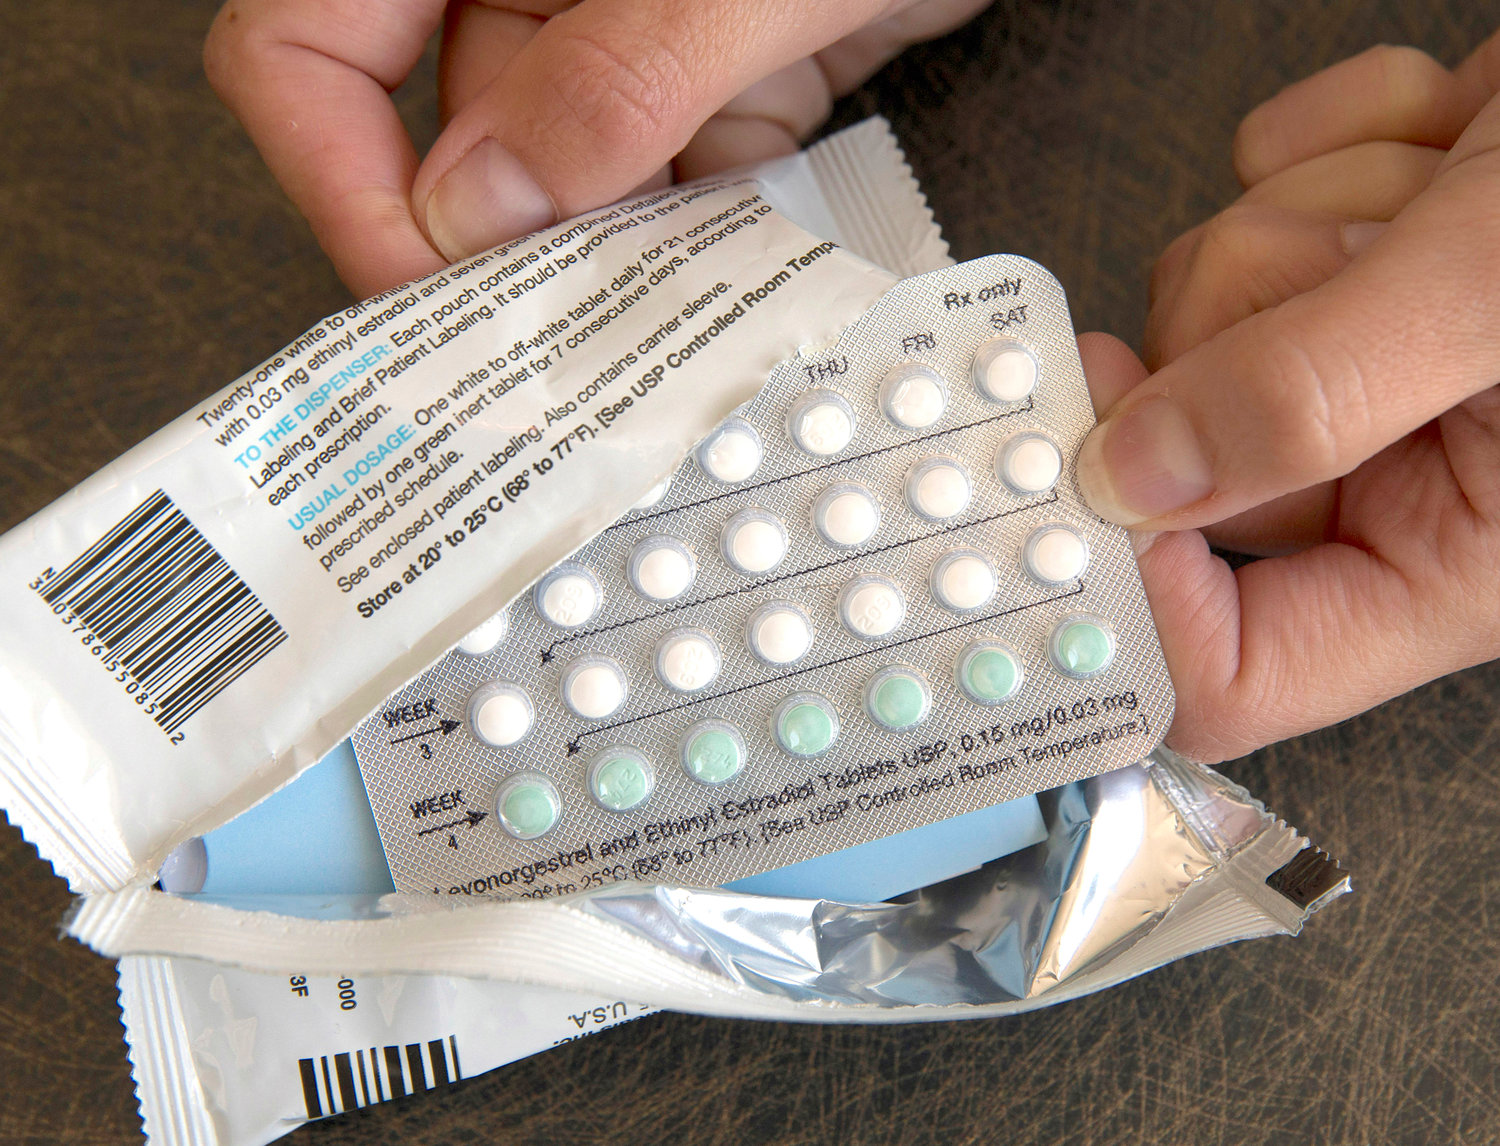 A one-month dosage of hormonal birth control pills is displayed in Sacramento, Calif. A drug company is seeking U.S. approval for the first-ever birth control pill that women could buy without a prescription. The request from a French drugmaker sets up a high-stakes decision for the Food and Drug Administration amid the political fallout from the Supreme Court’s recent decision overturning Roe v. Wade.